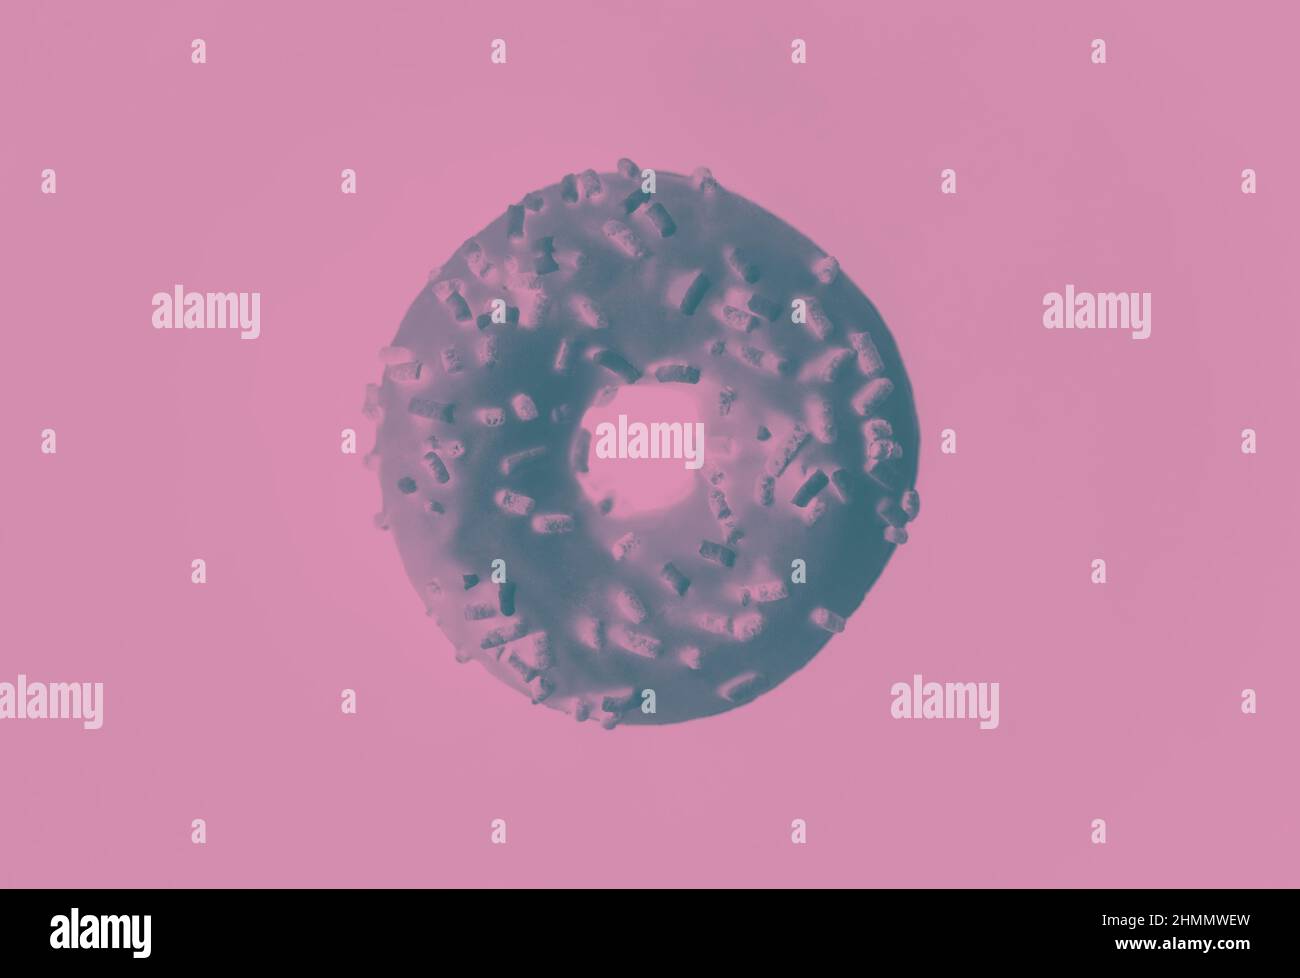 One sweet donut with sprinkles on a pink background with a negative filter. The donut symbol. Sweet delicious pastries. Stock Photo